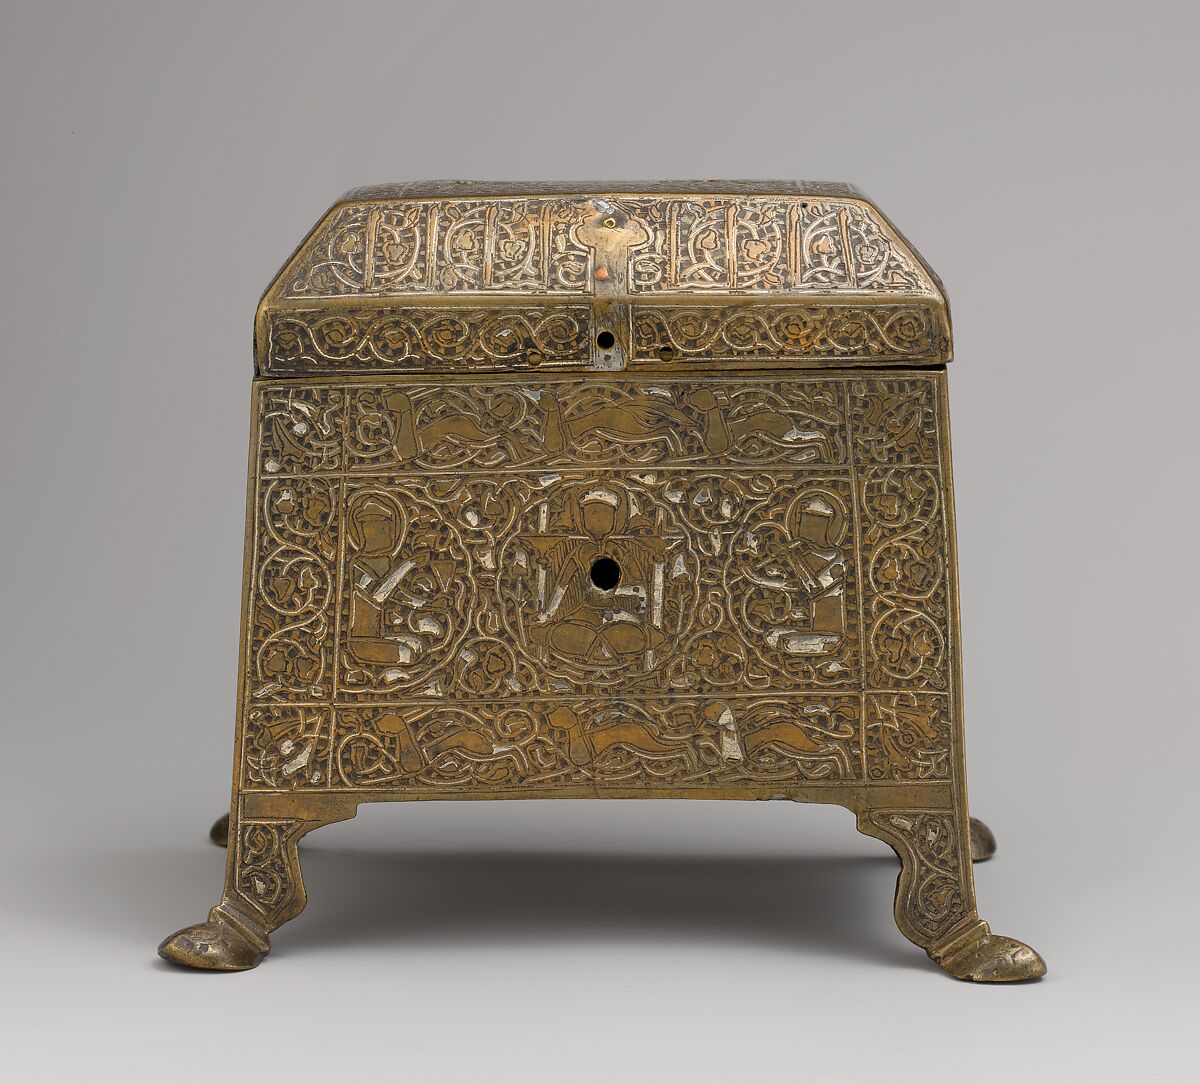 Casket with Figural Imagery, Brass; worked metal sheet inlaid with silver